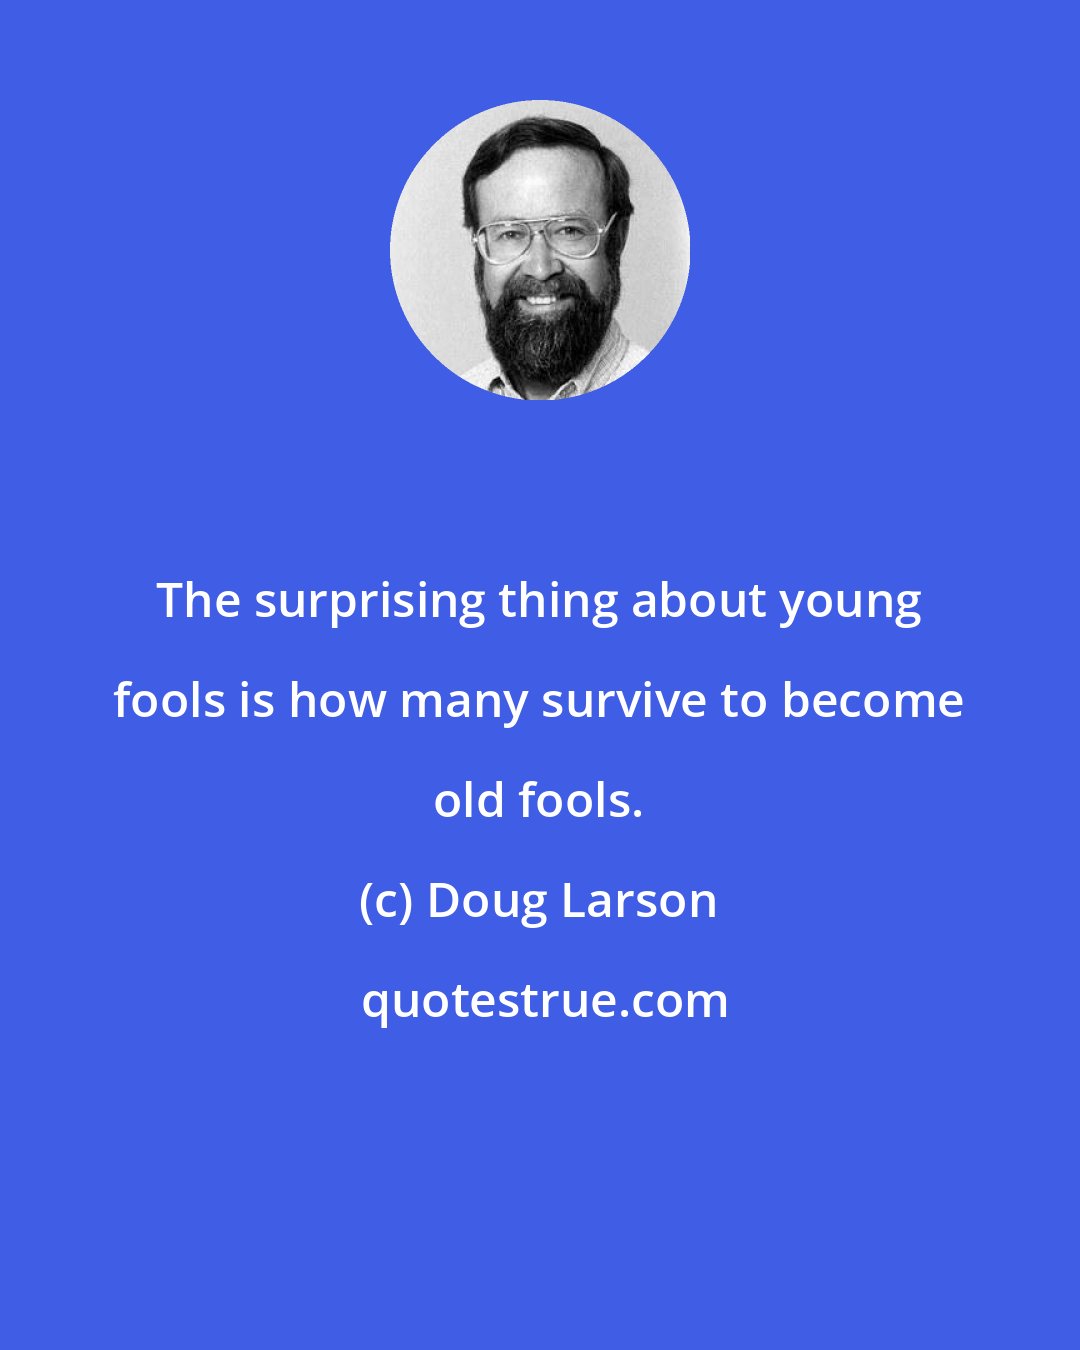 Doug Larson: The surprising thing about young fools is how many survive to become old fools.